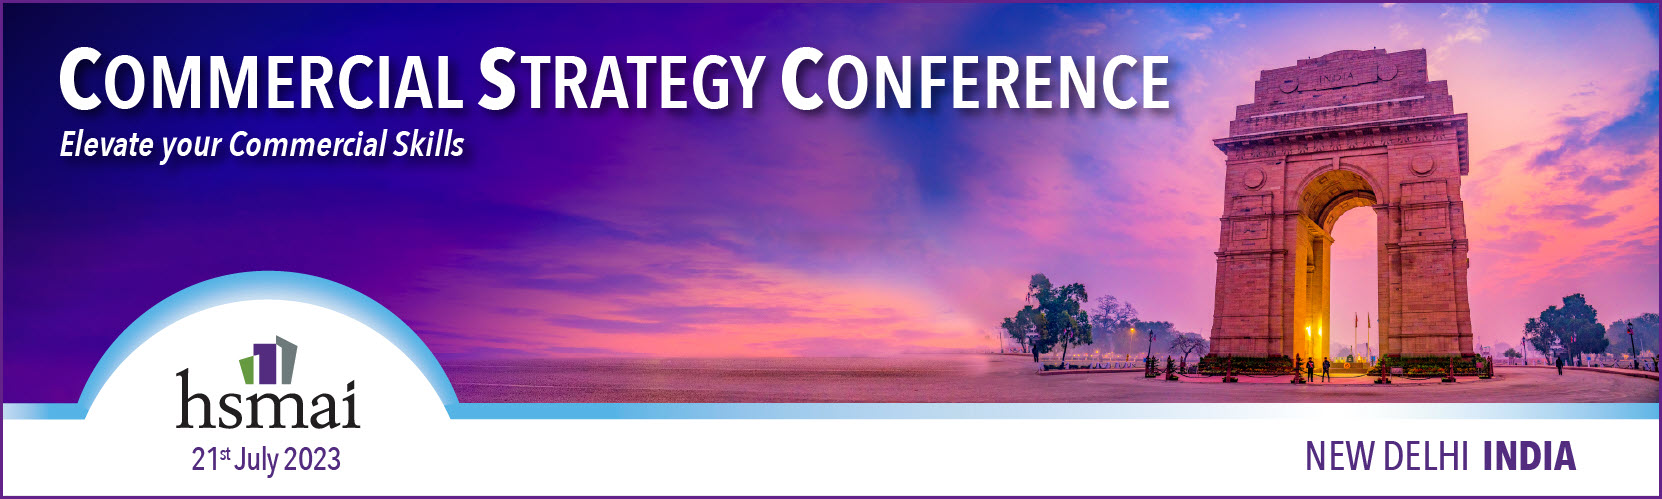 Commercial Strategy Conference India – Register